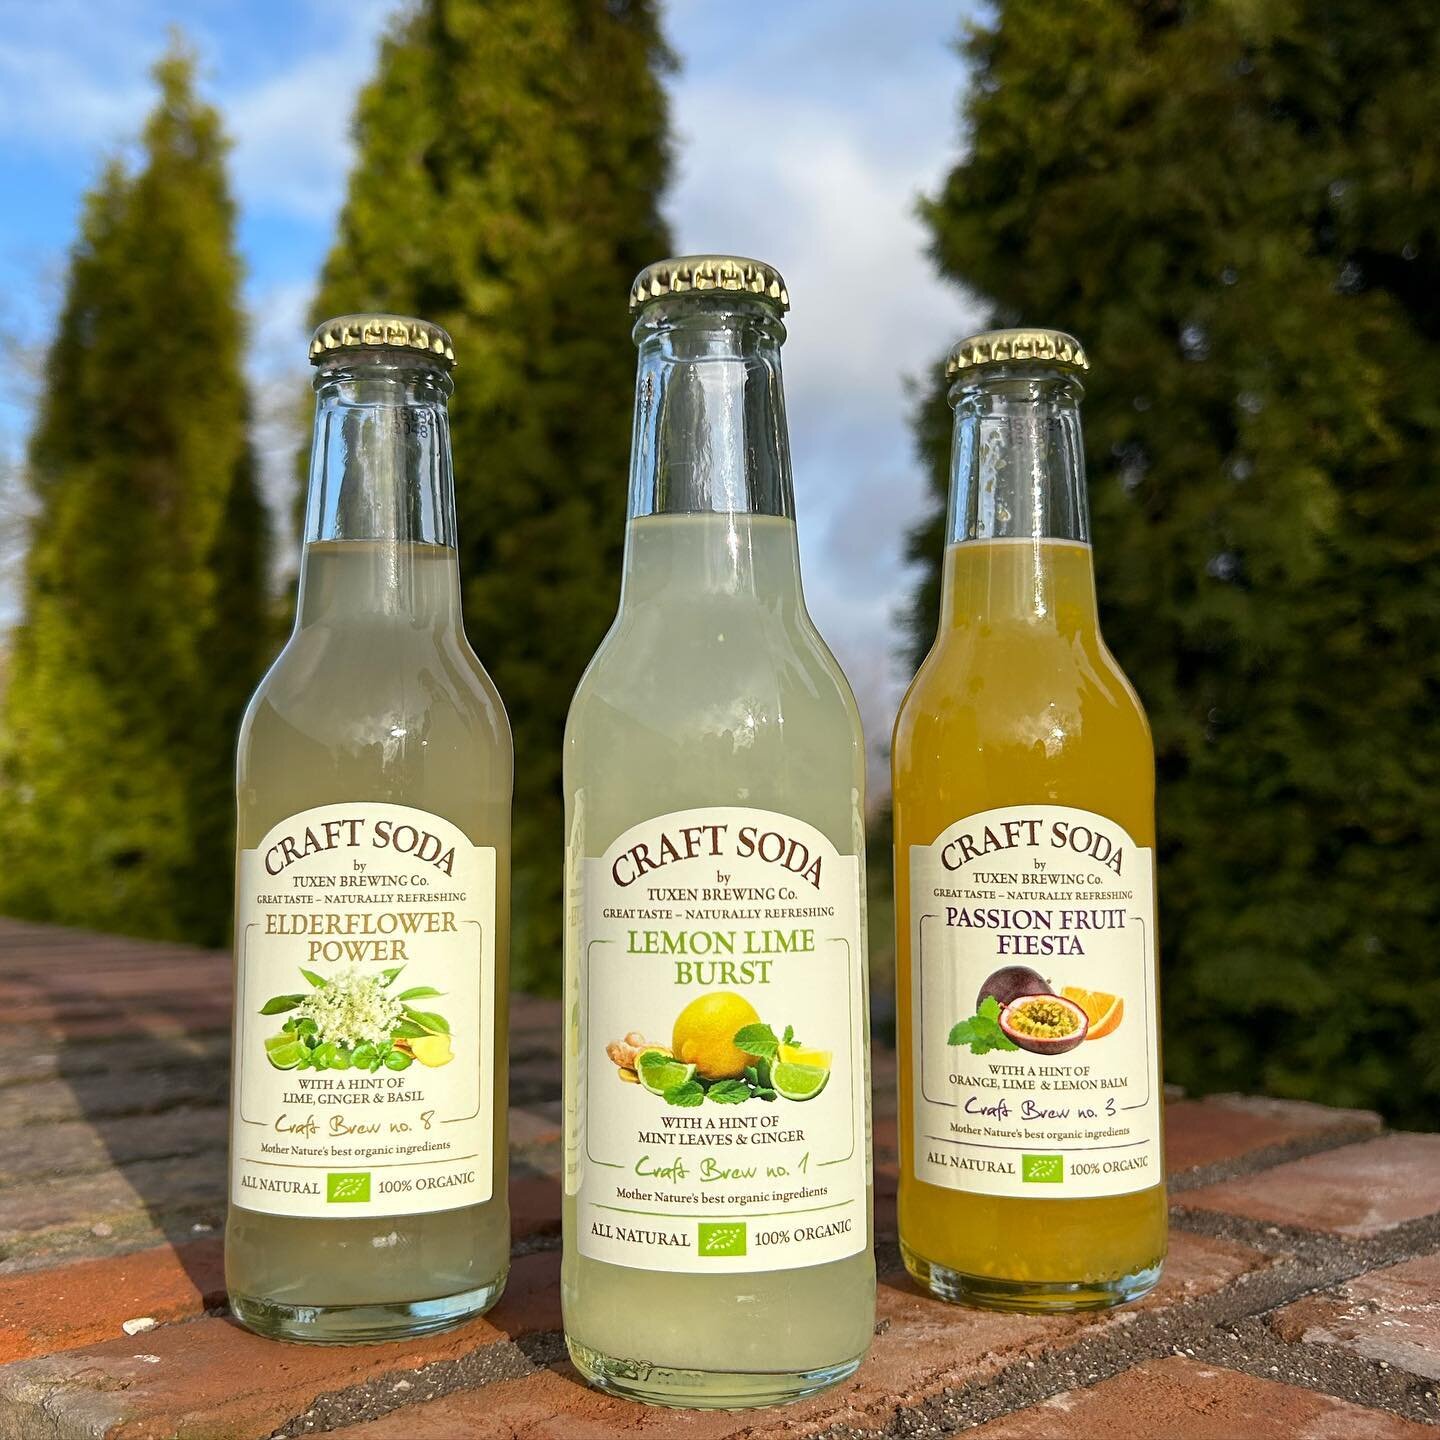 No concentrates, no additives, no preservatives, no citric acids. In other words, no compromises. Just Mother Nature&rsquo;s good stuff. 100% organic, naturally! Cheers! 💚😋 www.craftsoda.dk @craft.soda #gourmetsoda #nonalcoholicdrink #craftsoda  #o